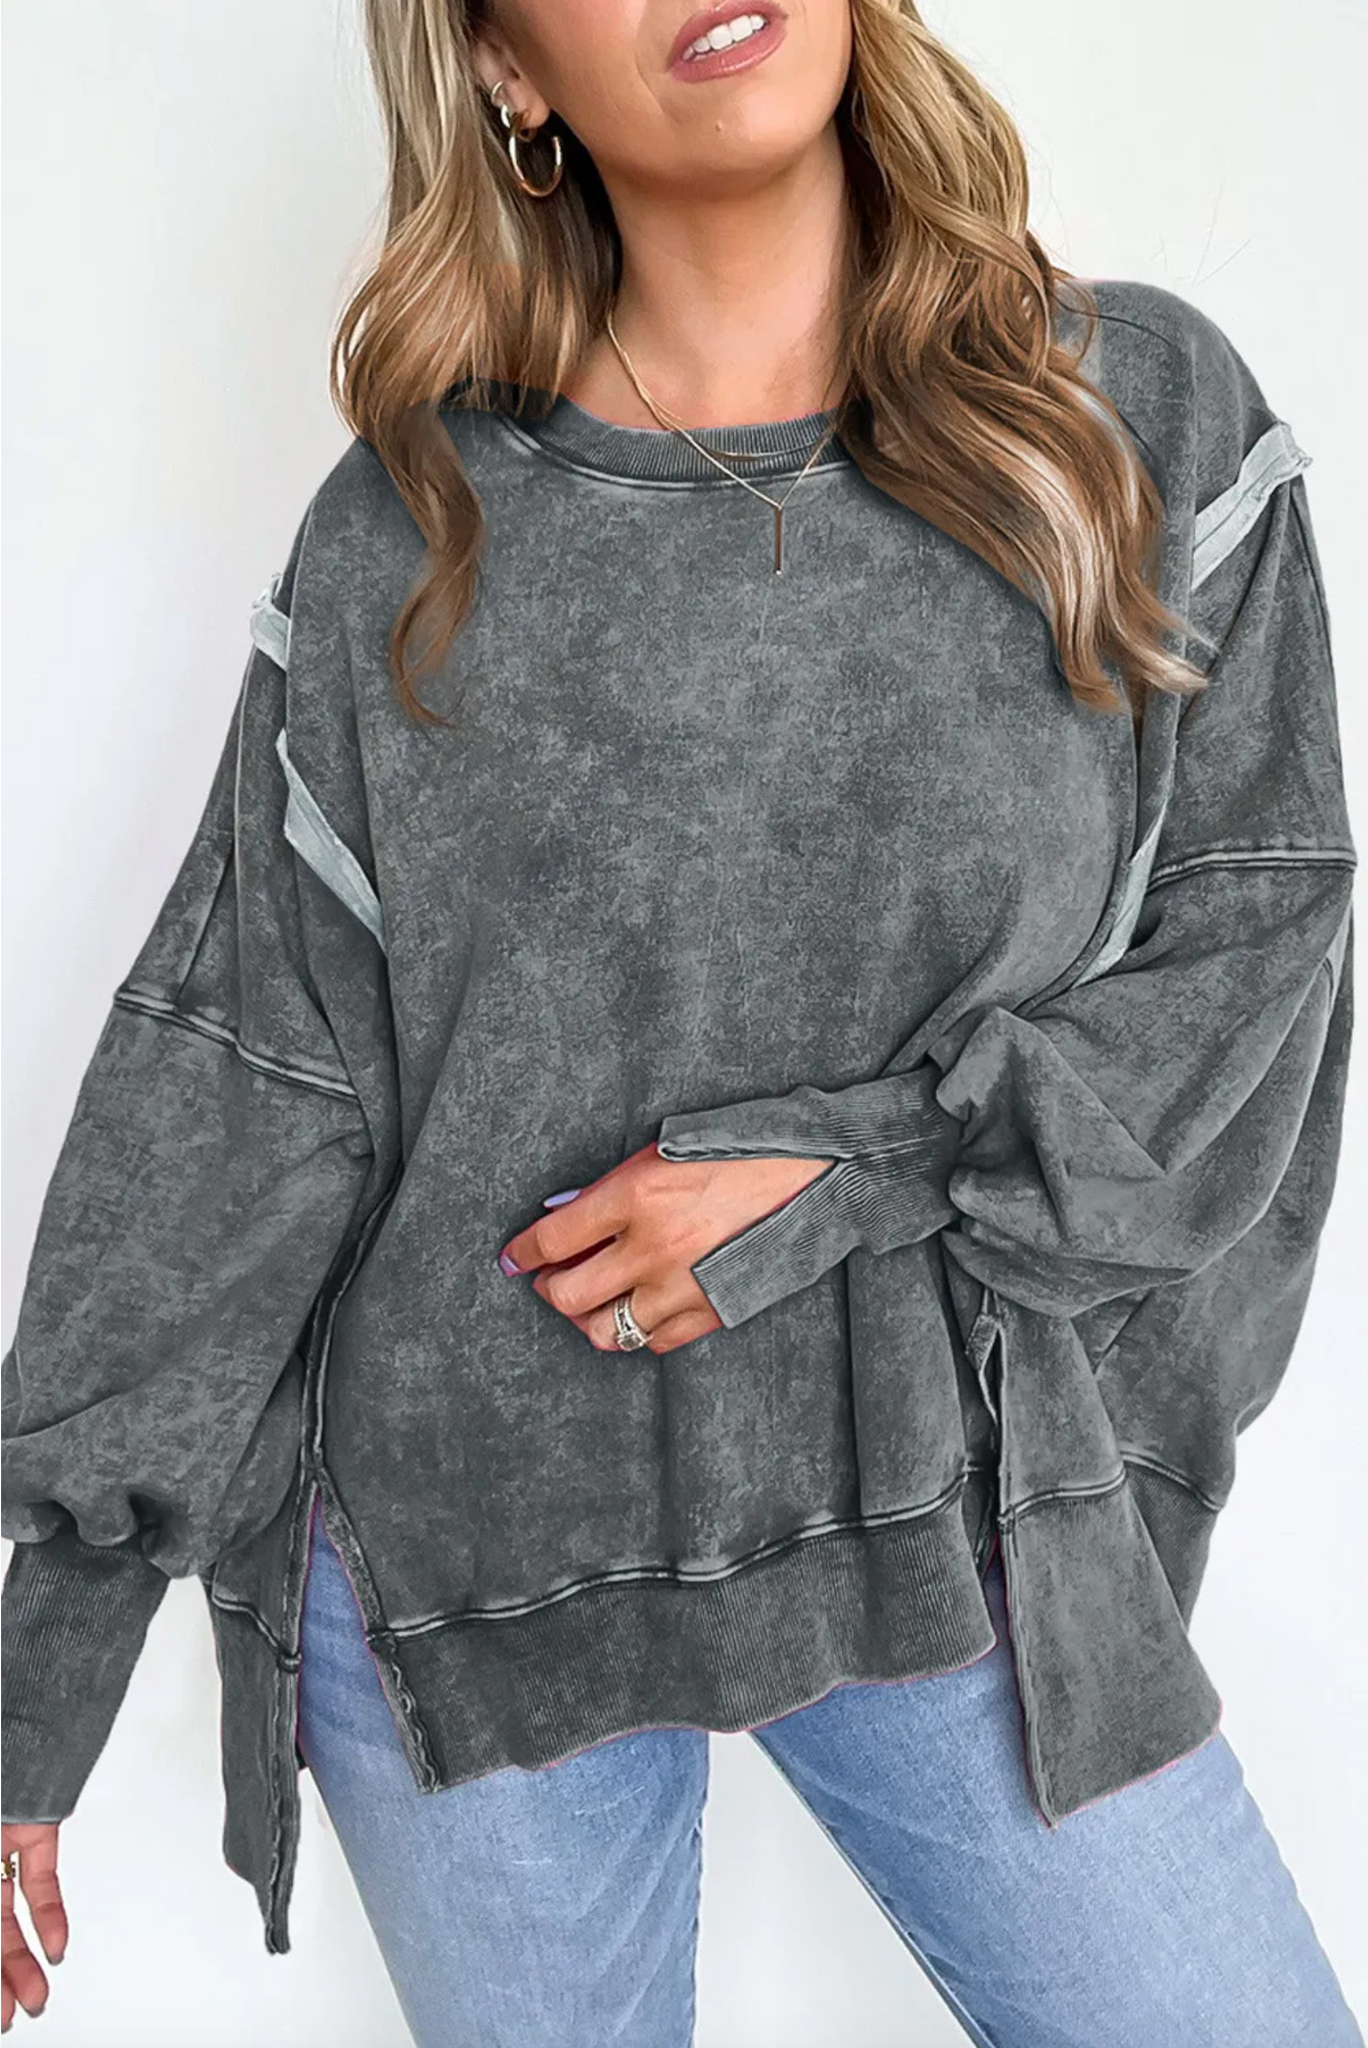 Gray Acid Wash Relaxed Fit Seamed Pullover Sweatshirt with Slits